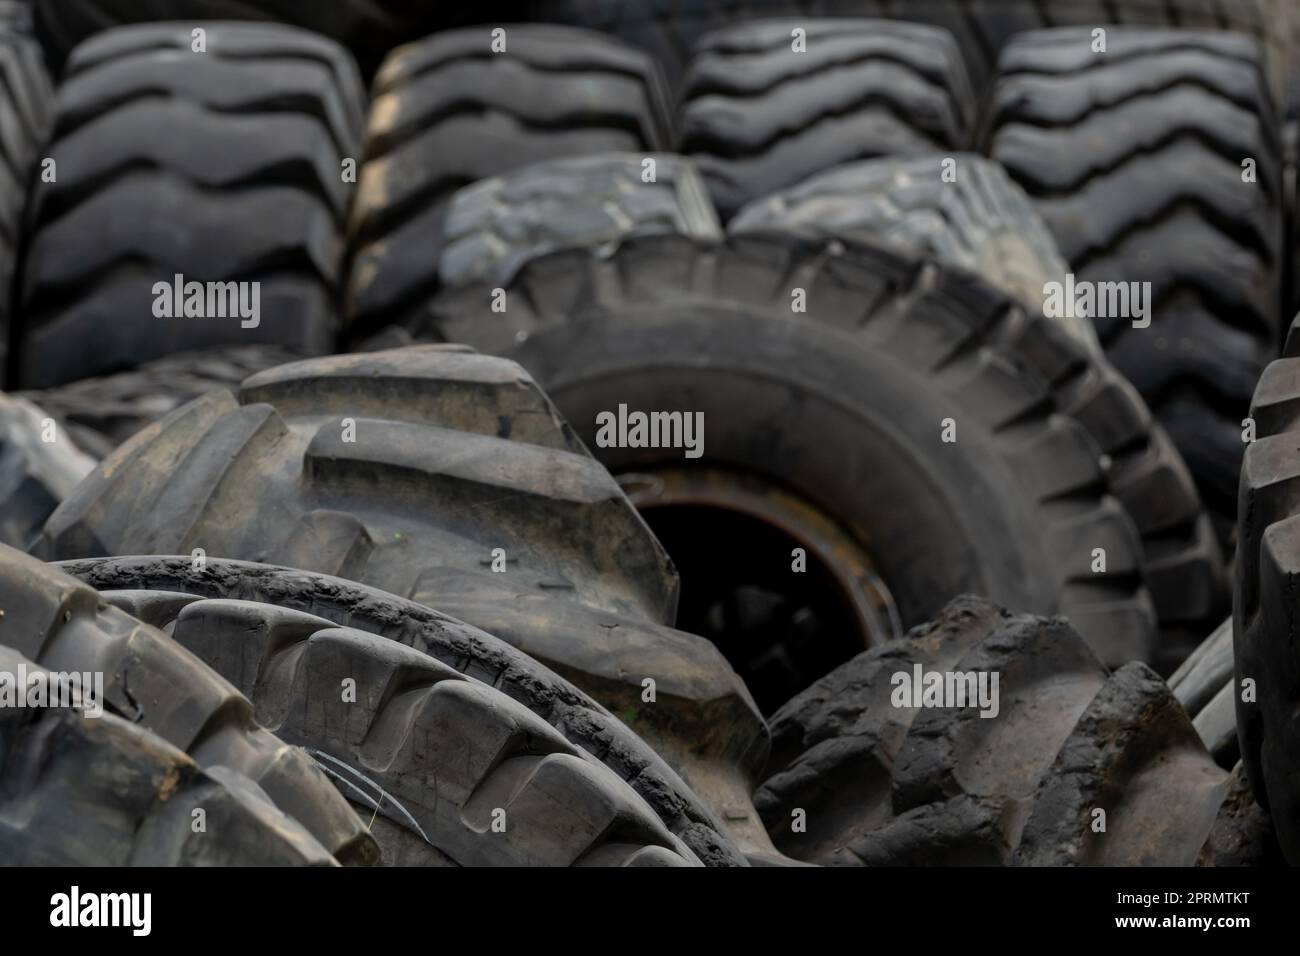 Closeup used truck tires. Old tyres waste for recycle or for landfill. Black rubber tire of truck. Pile of used tires at recycling yard. Material for landfill. Recycled tires. disposal waste tires. Stock Photo